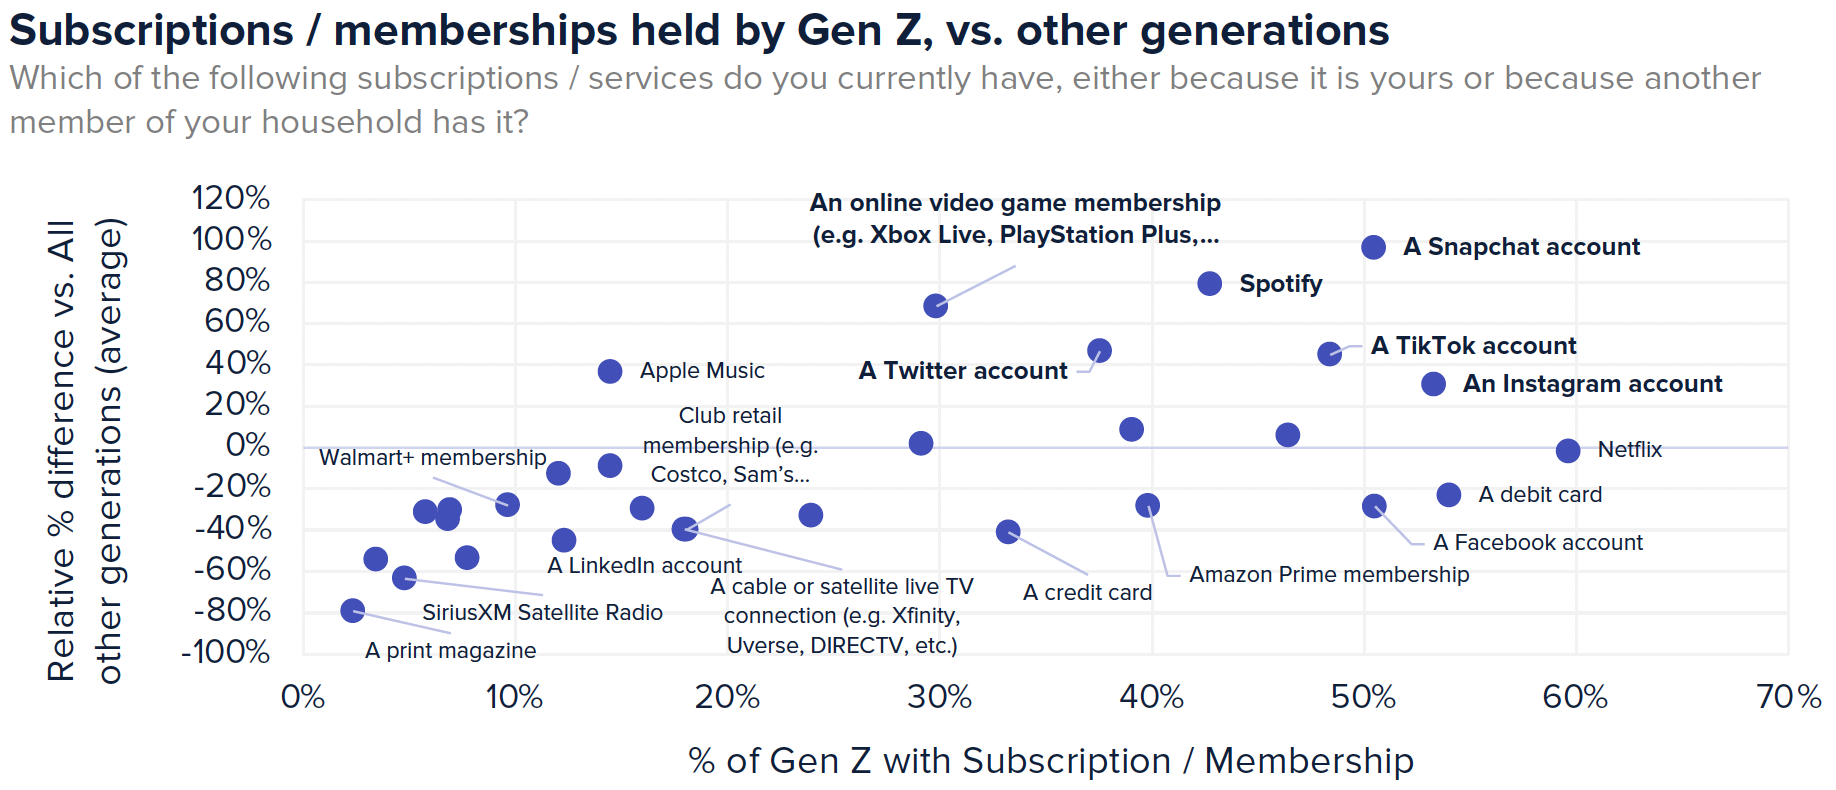 Subscriptions / memberships held by Gen Z vs other generations. Chart indicates they’re more likely to have Snapchat, Spotify, online gaming membership, Twitter, and TikTok